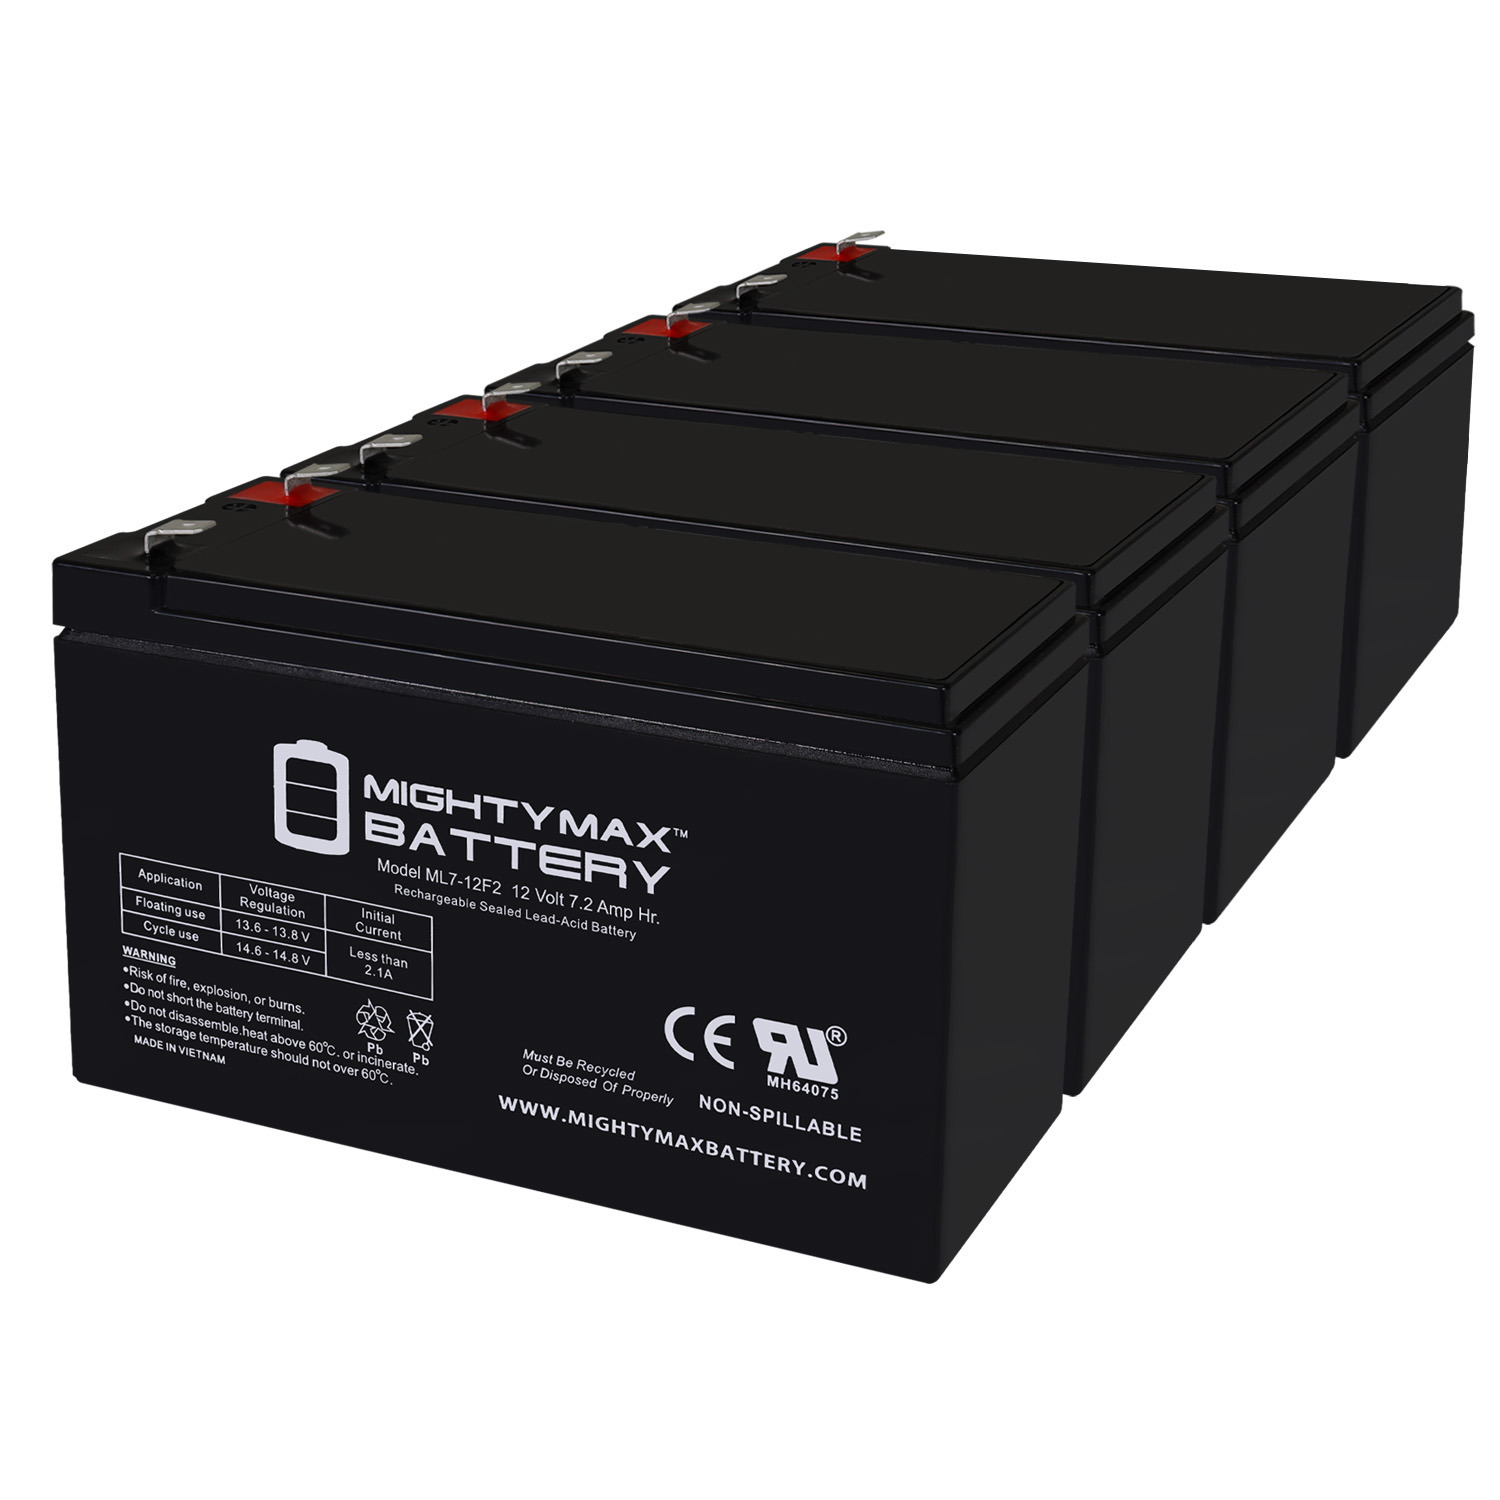 12V 7Ah F2 Replacement Battery for CyberPower PP1500-T4 - 4 Pack